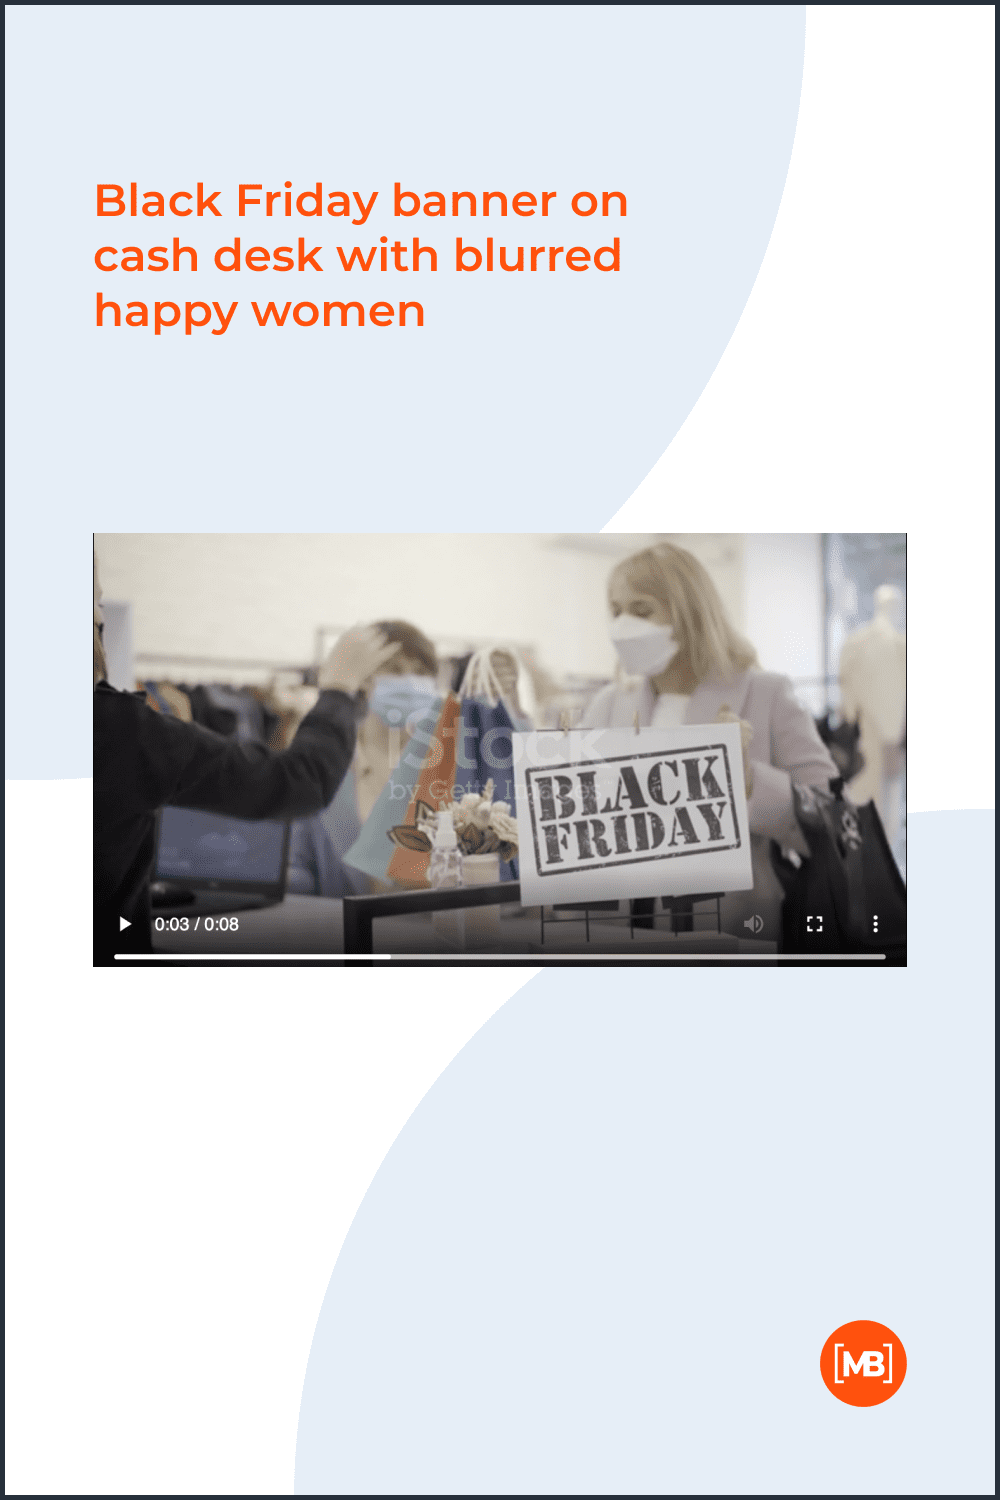 Black Friday banner on cash desk with blurred happy women.